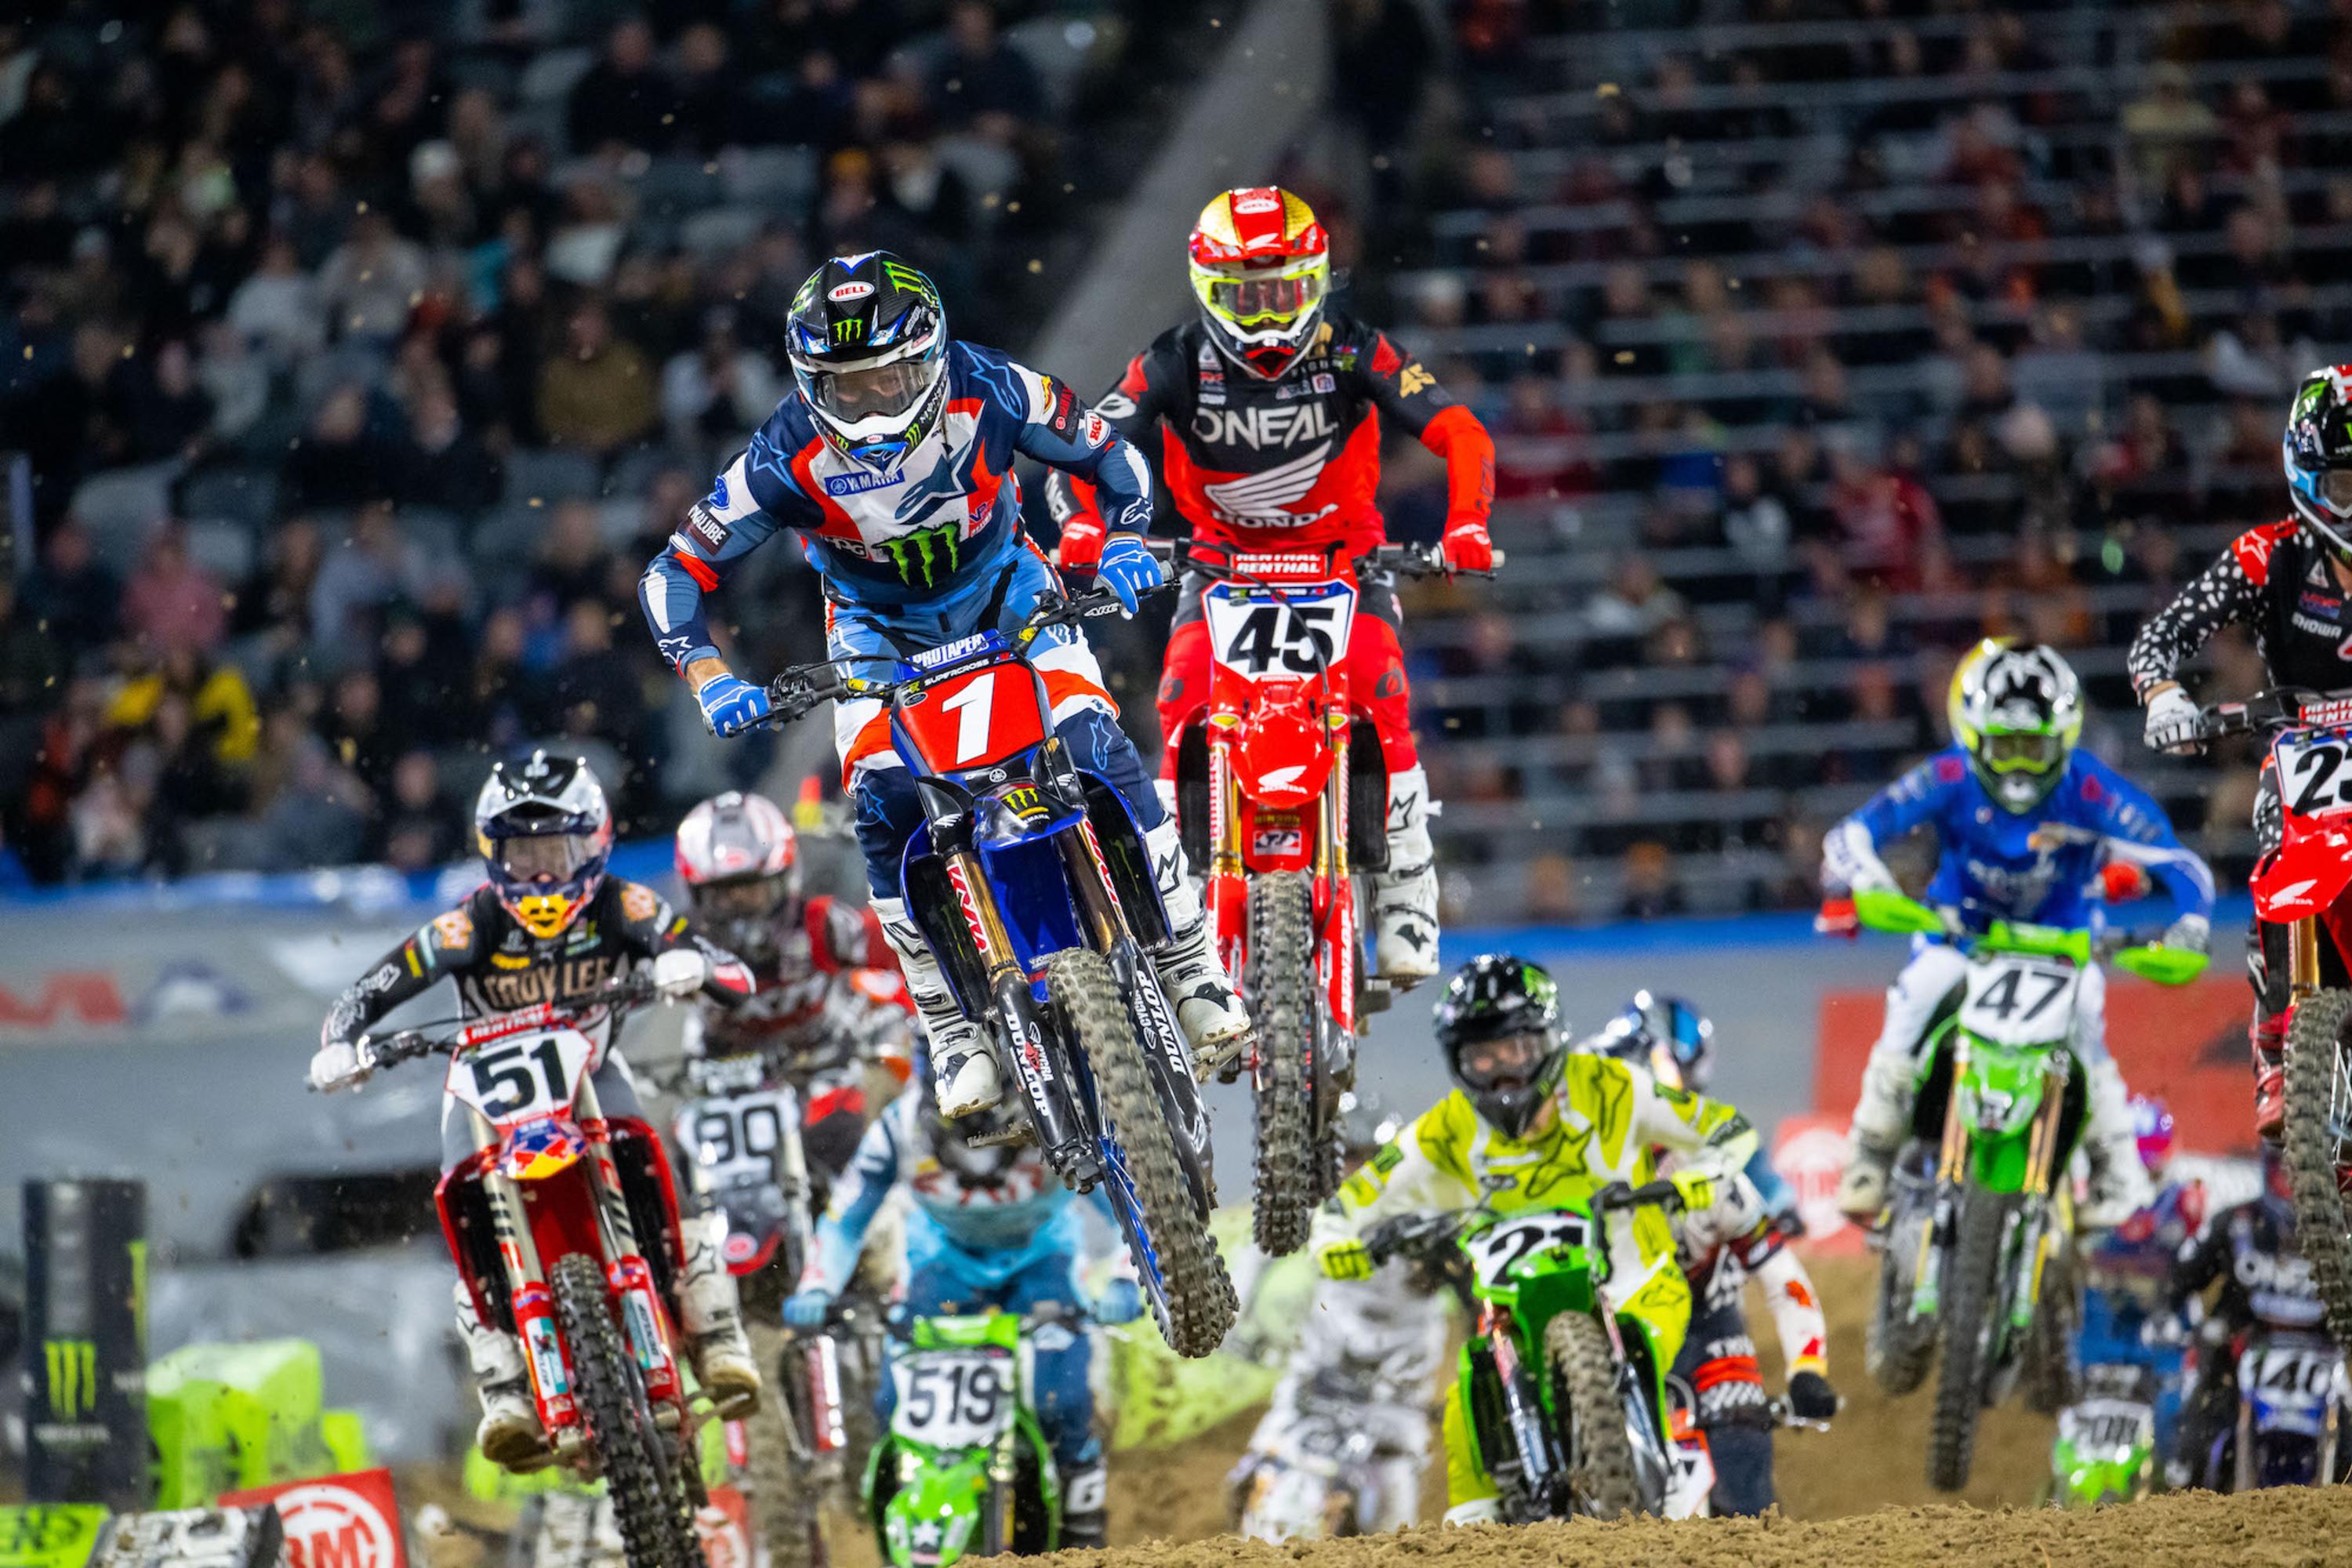 Tomac and Lawrence Win Again in San Diego